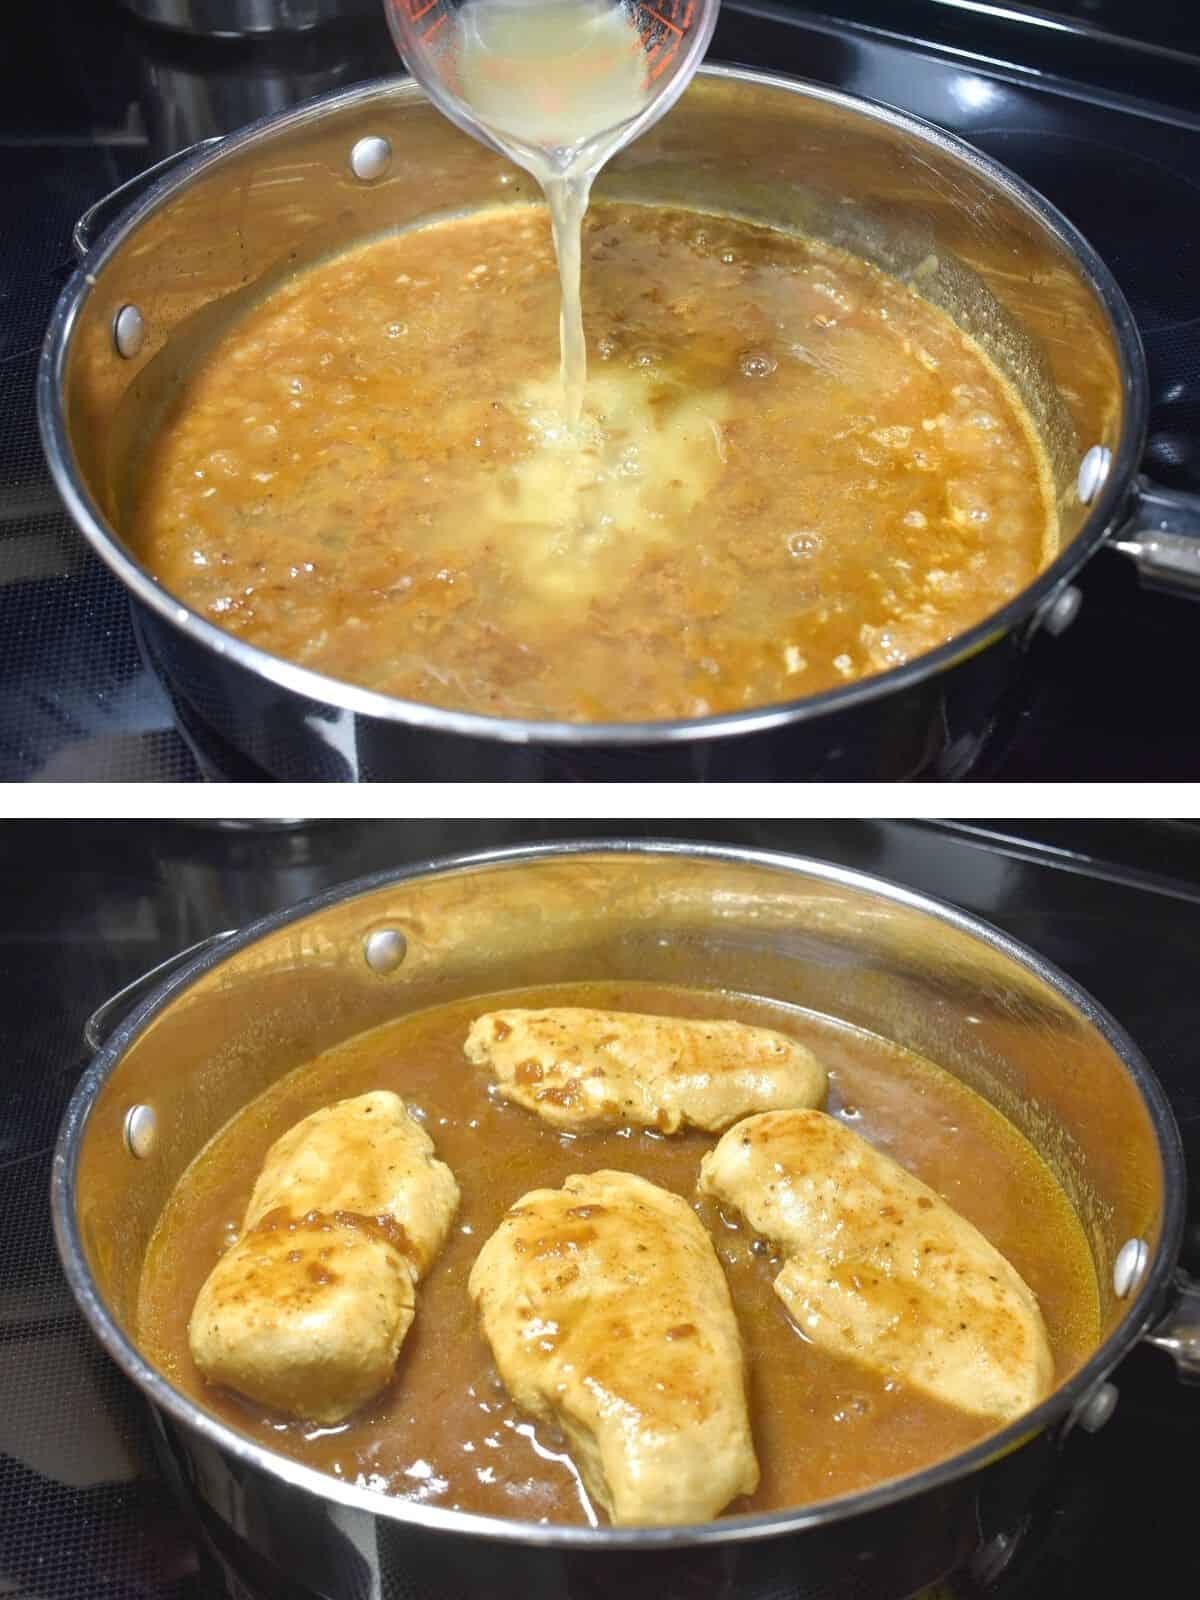 Two images showing the soup and chicken broth in the skillet then the chicken added back in.